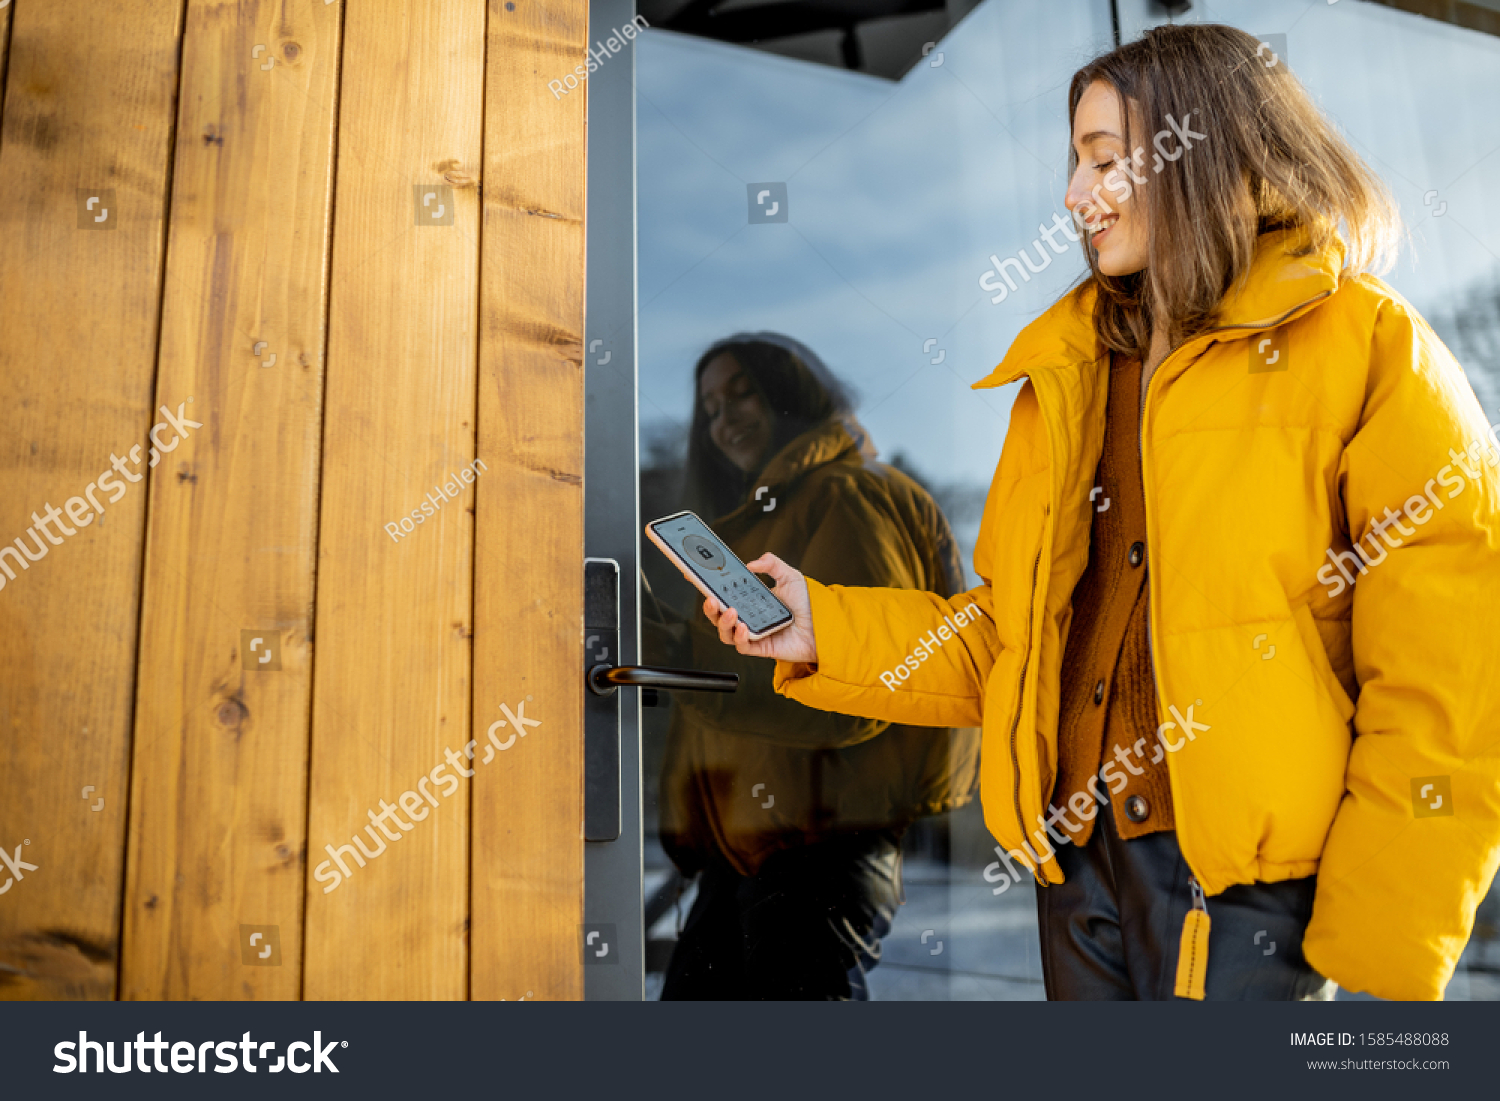 Woman locking smartlock on the entrance door using a smart phone. Concept of using smart electronic locks with keyless access #1585488088